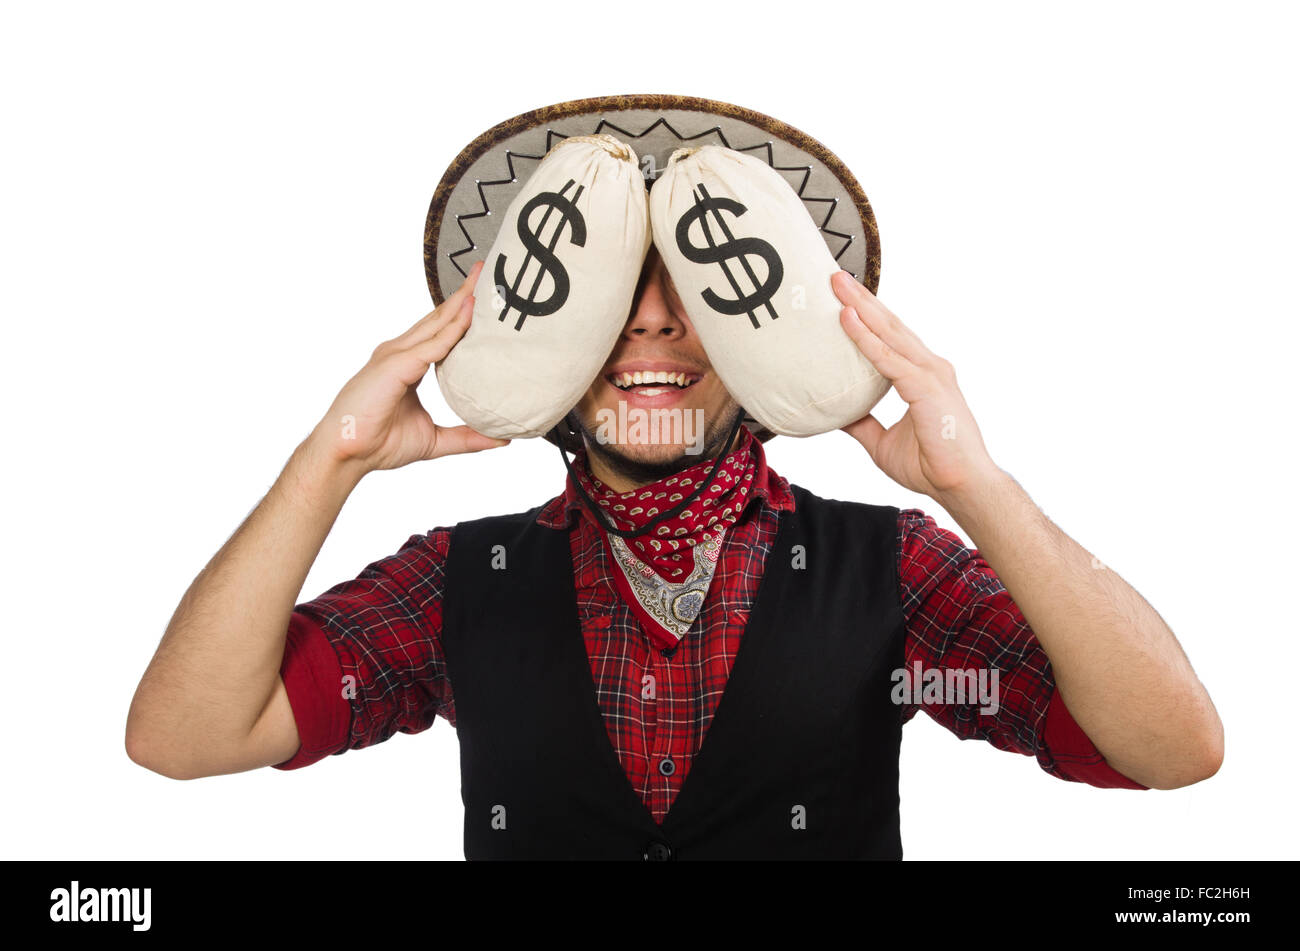 Young cowboy with money bags isolated on white Stock Photo